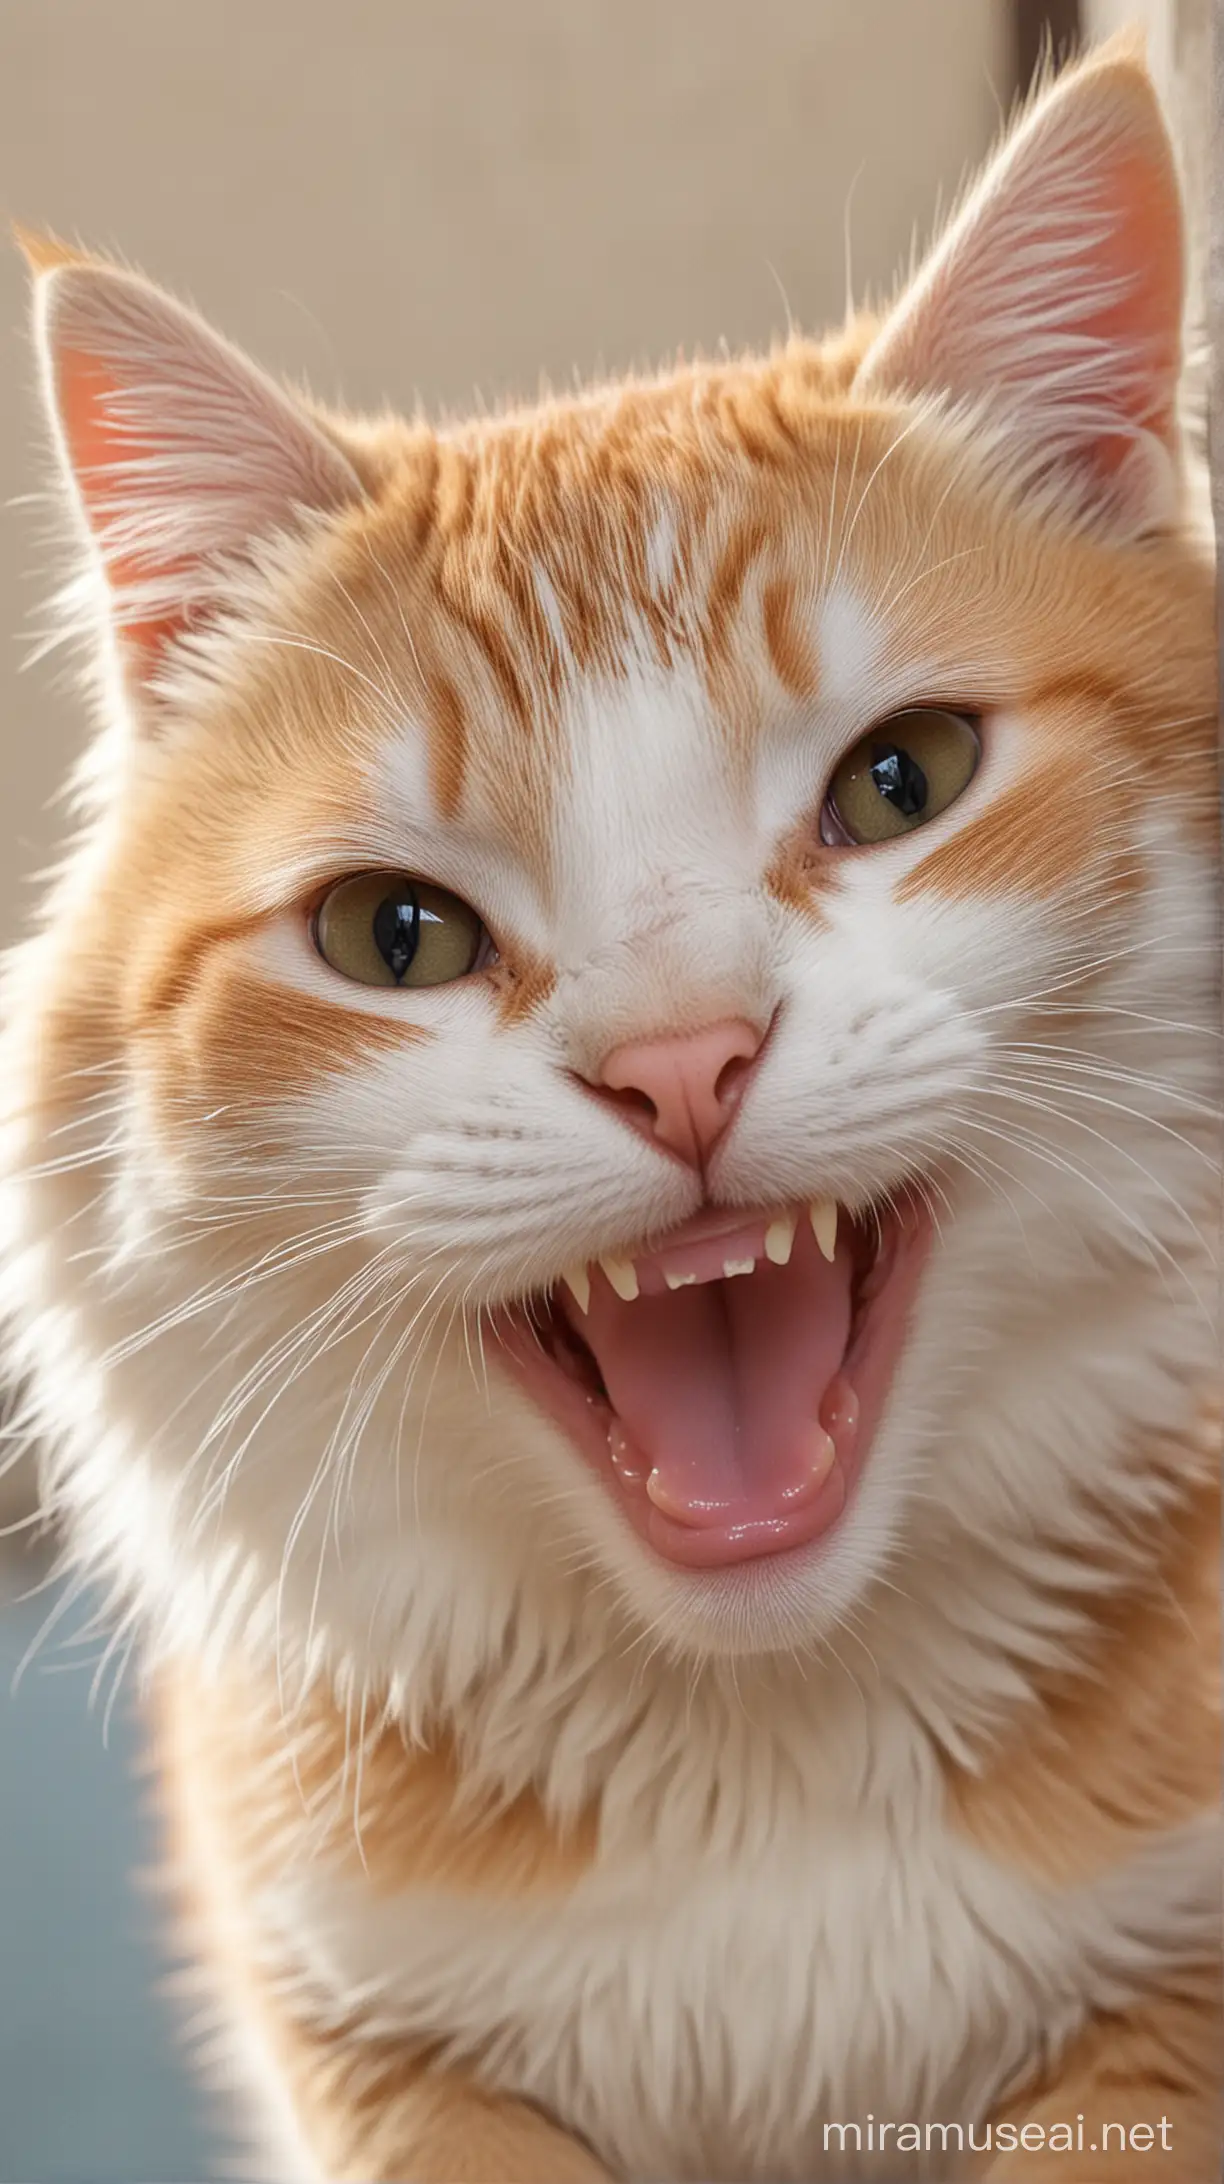 Cheerful Kitty with a Wide Smile